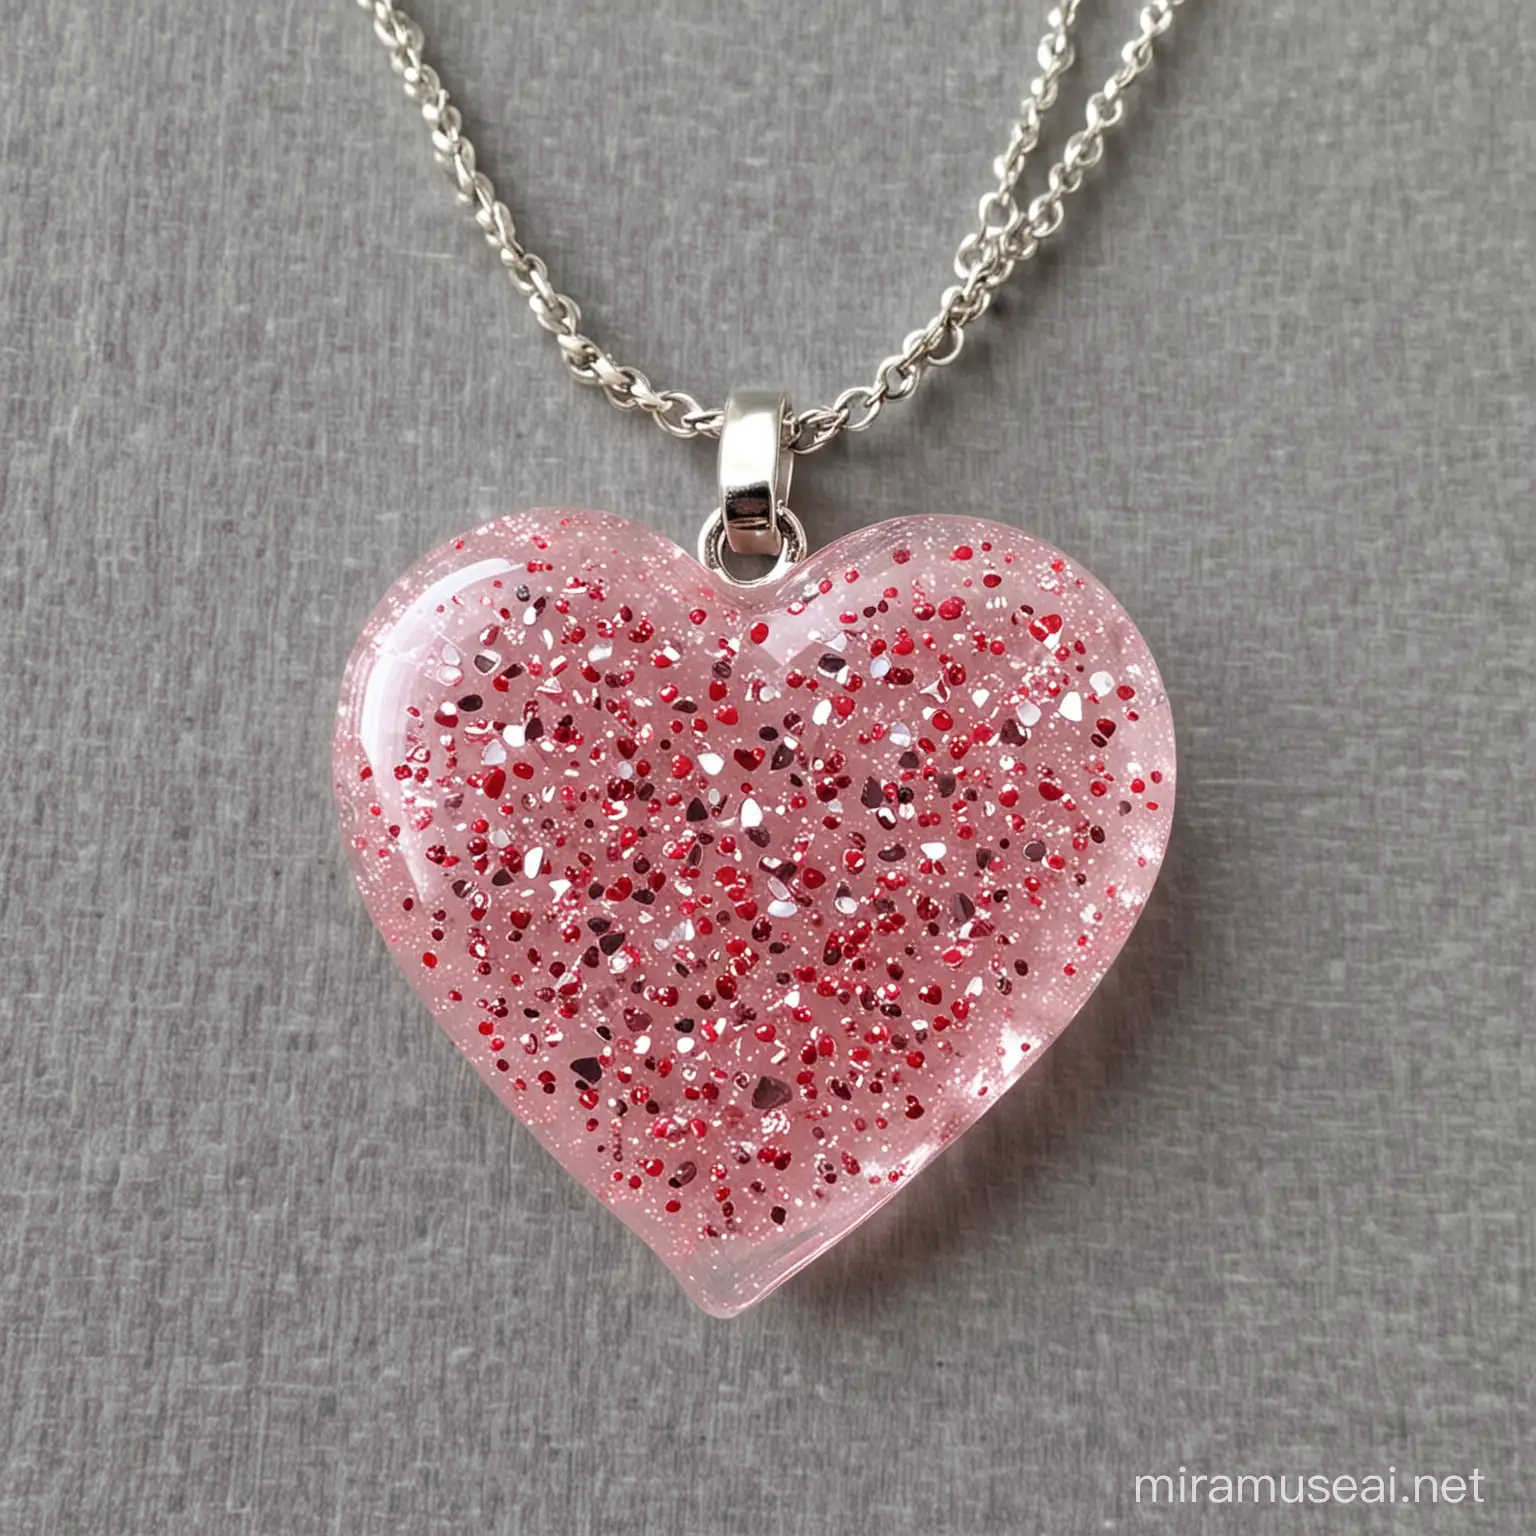 resin heart shaped pendant with metallic flakes and beads